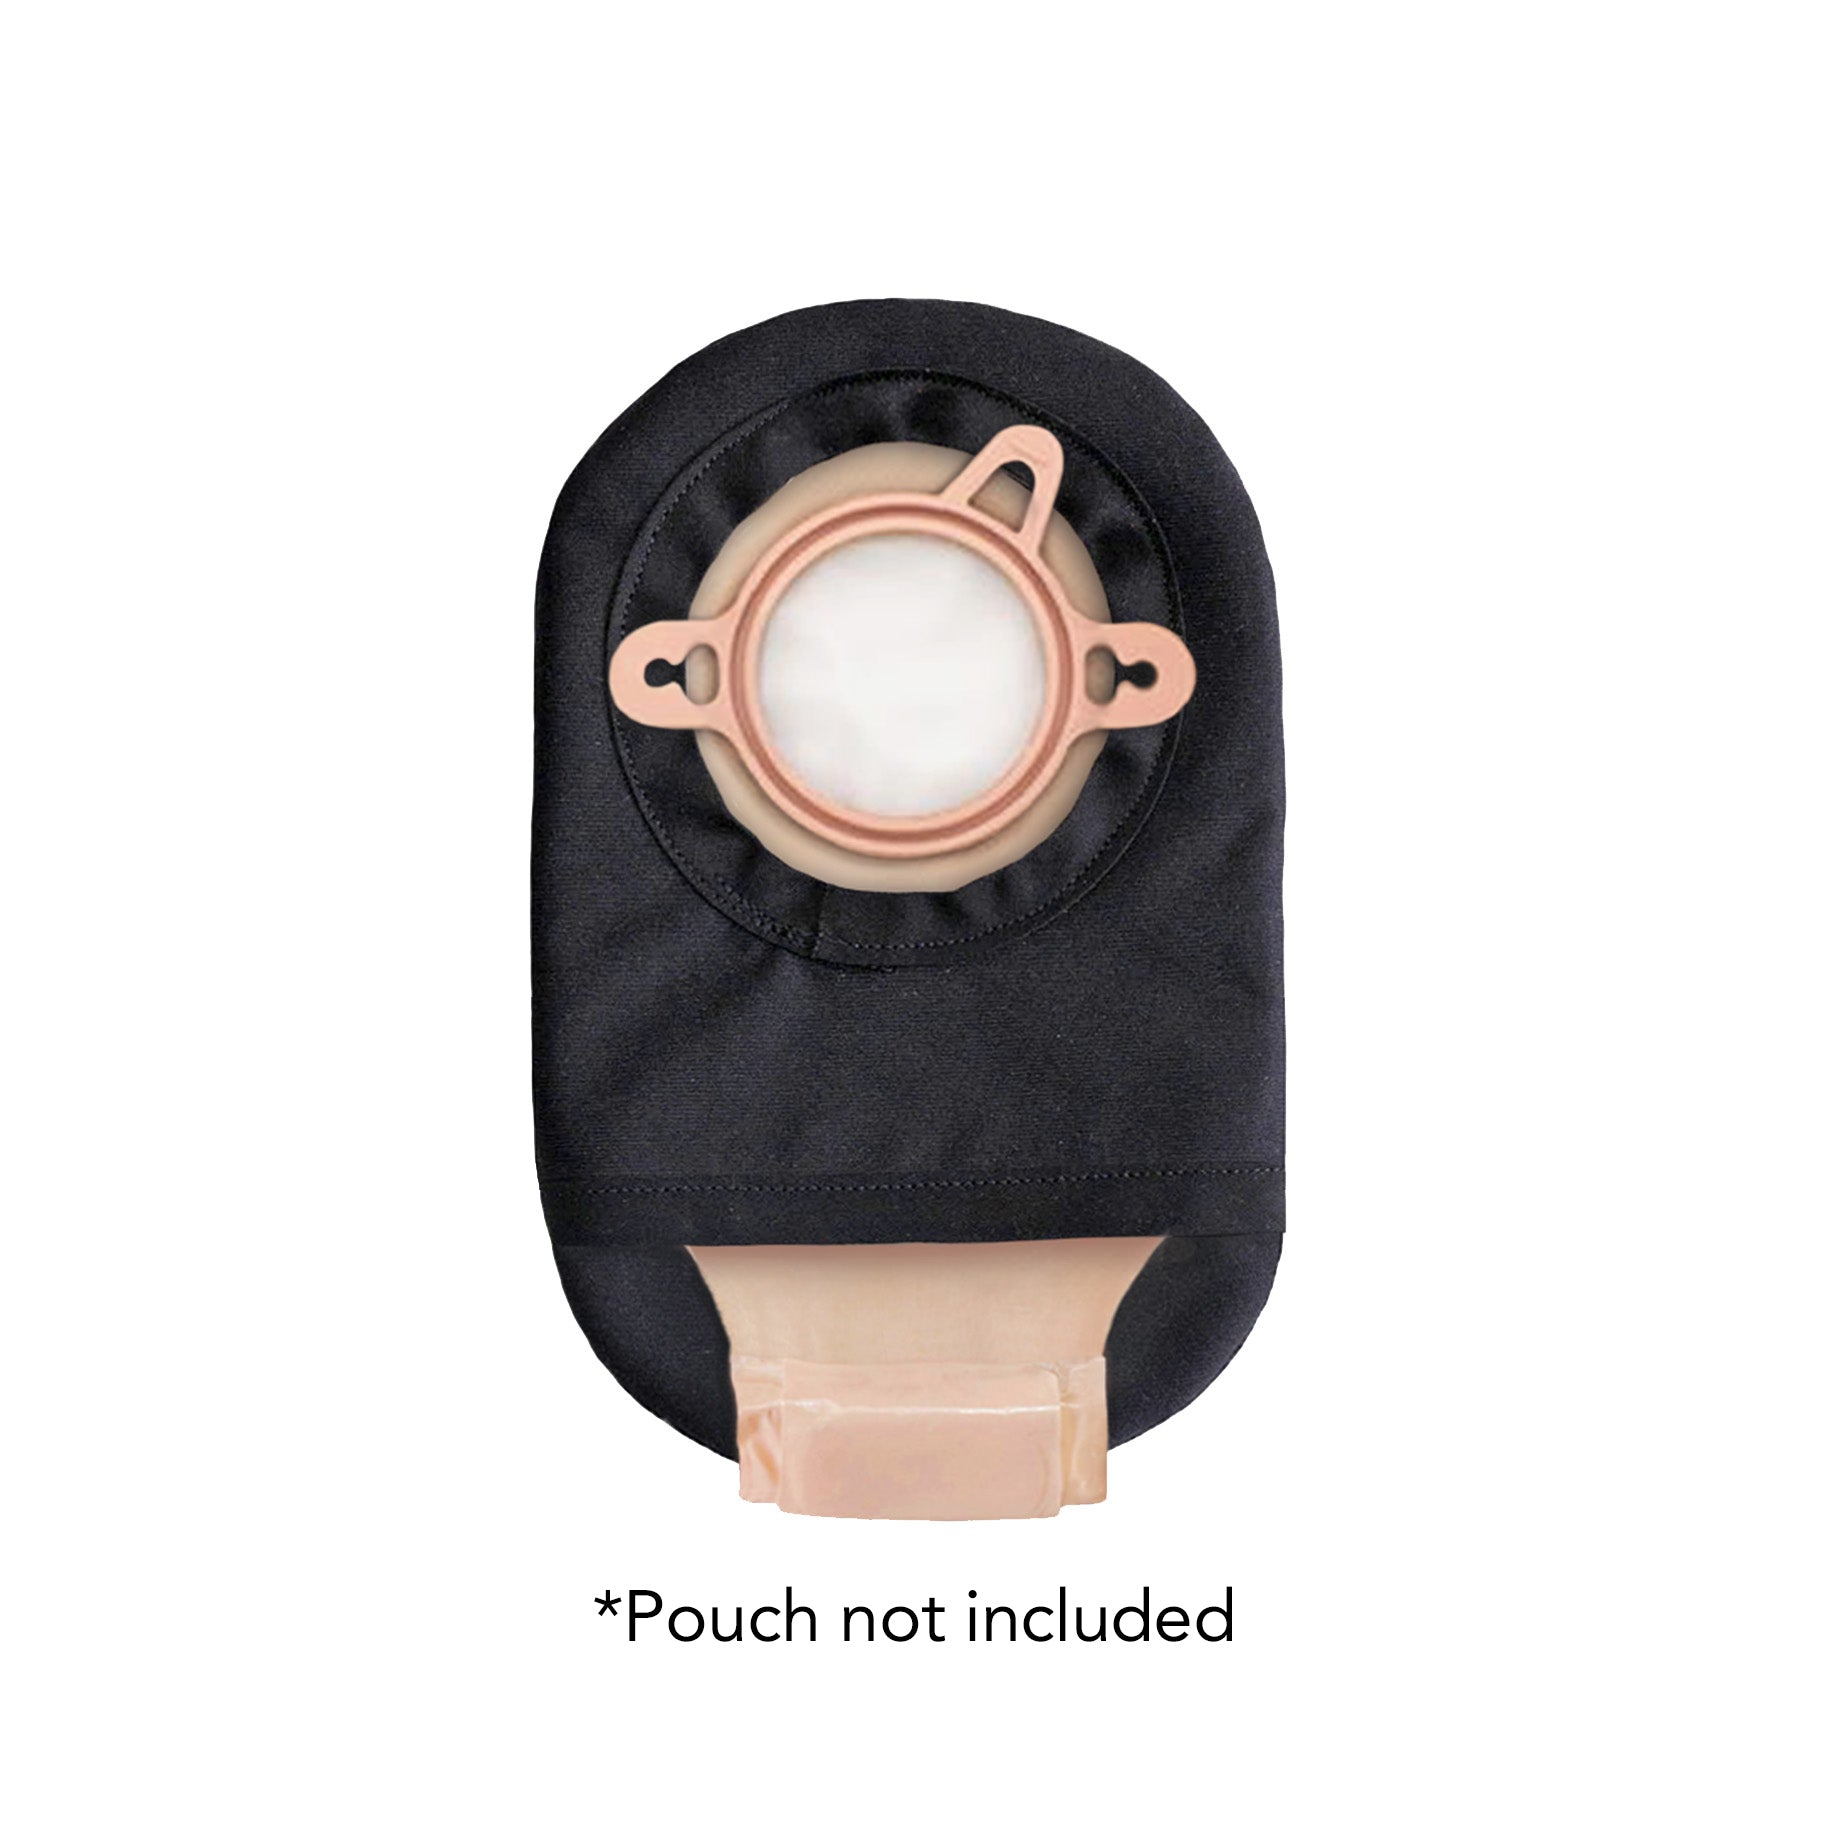 Pouch not included